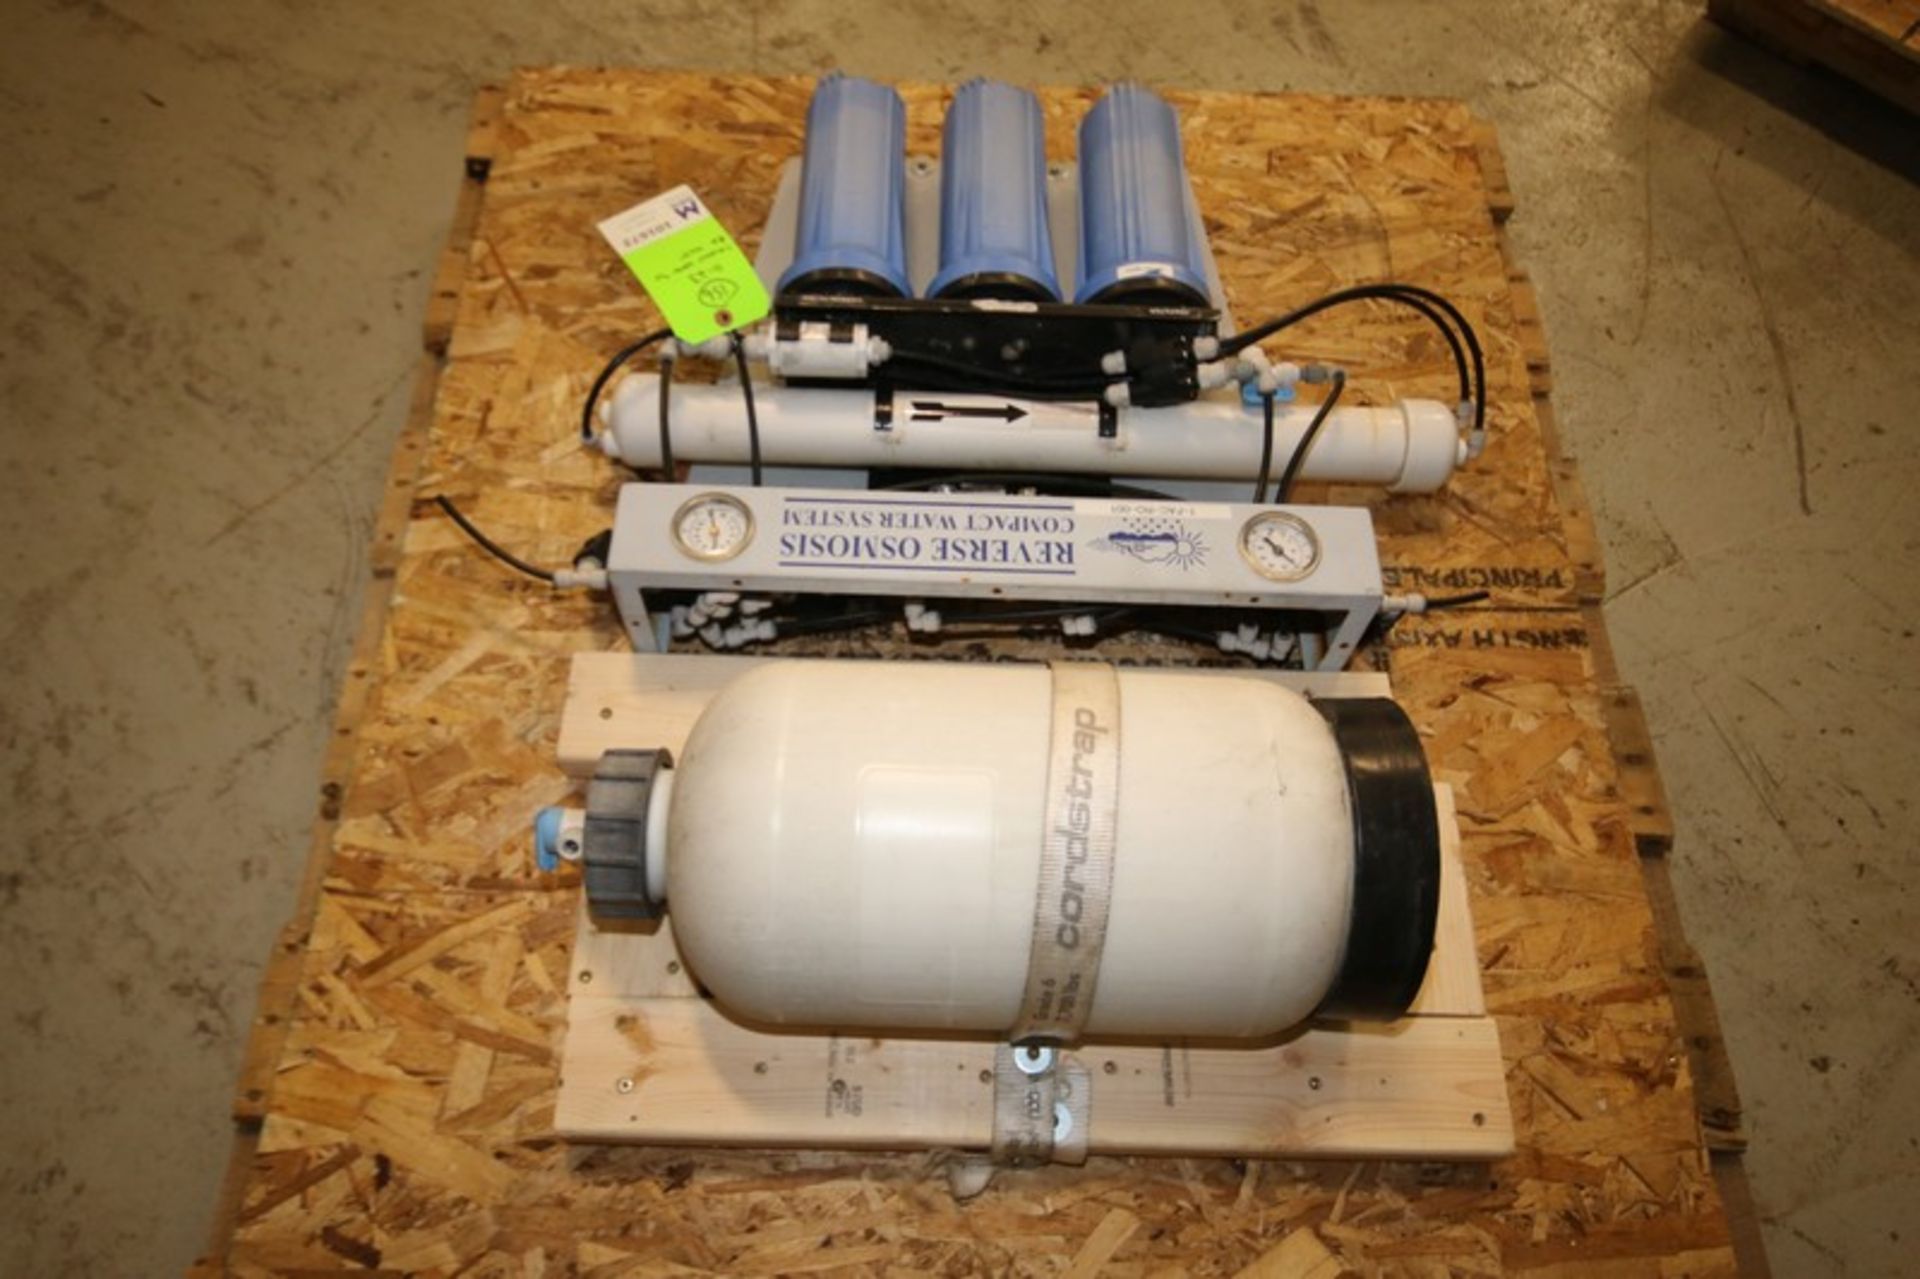 Compact Water System Wall Mounted RO System, Model LP-80, SN 02023-80, with (3) Filters & Holding - Bild 2 aus 3